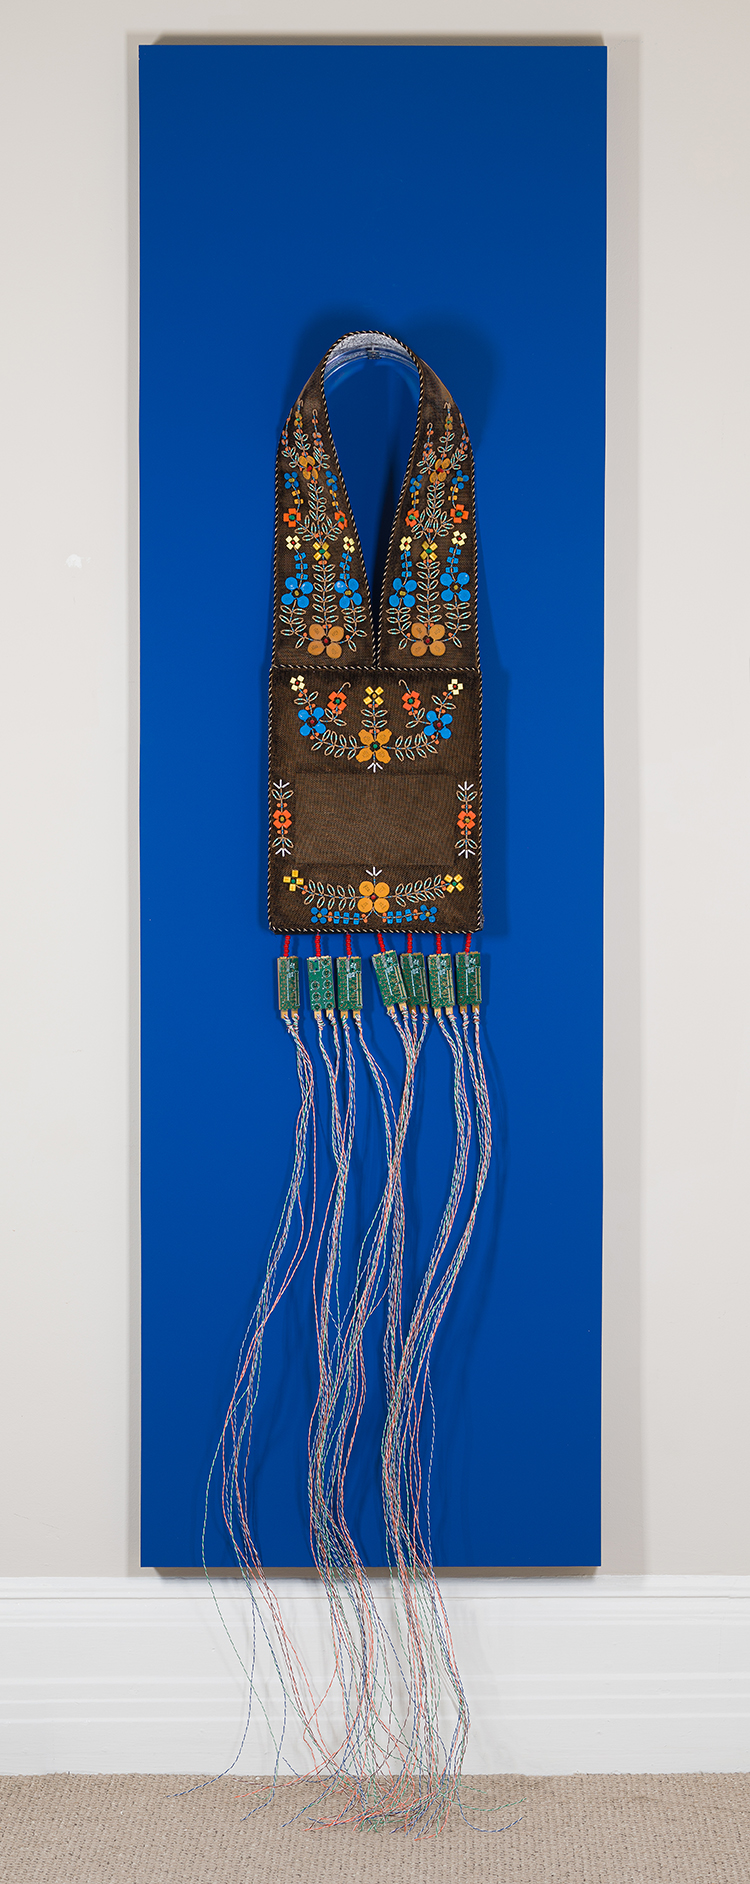 Bandolier for Pasapkedjinawong (The river that passes between the rocks) Rideau River by Barry Ace